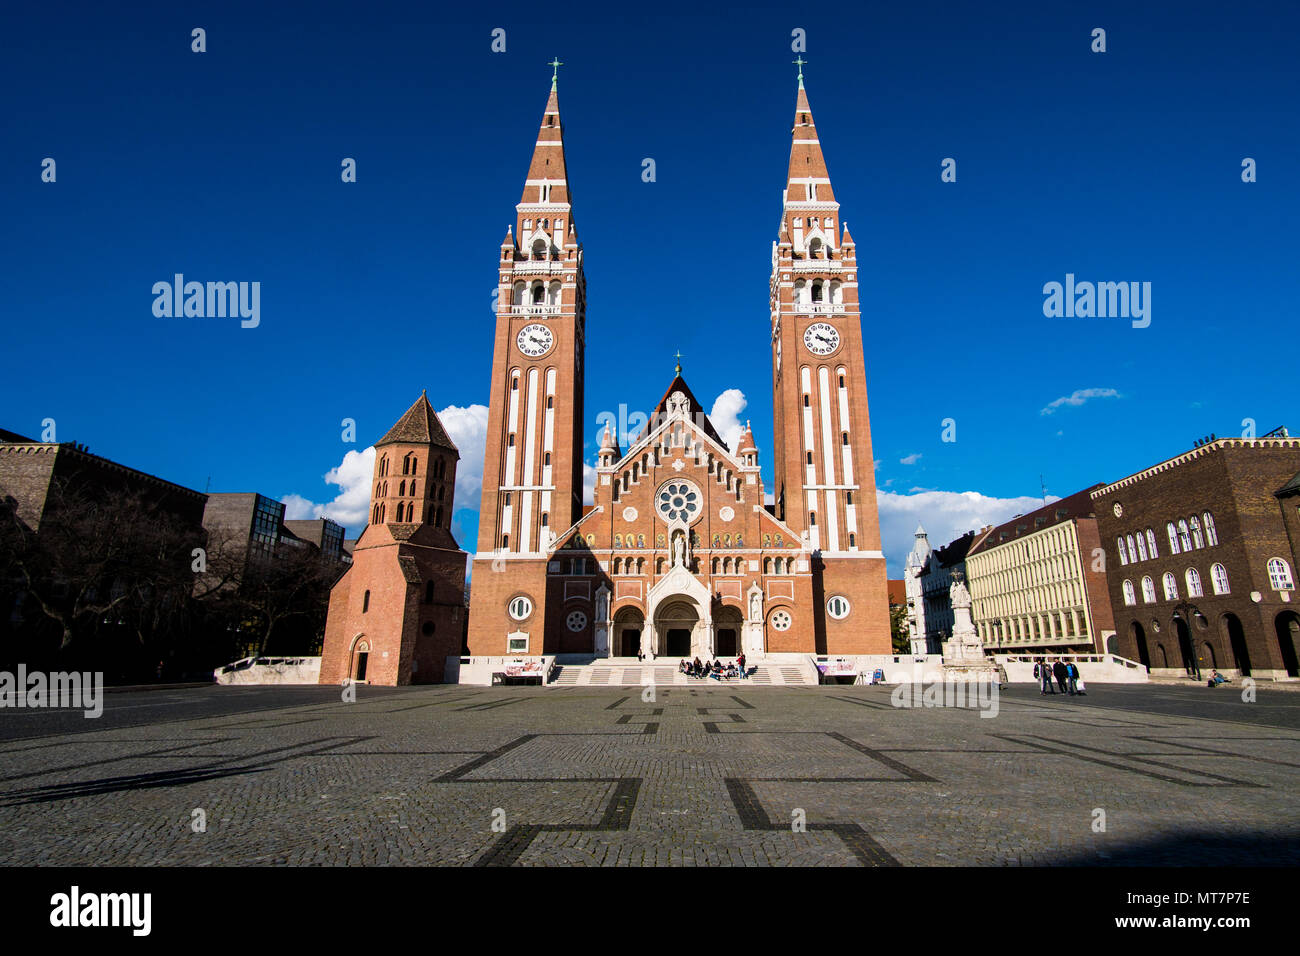 Szeged, Hungary - March 13, 2018: Votive Church and Cathedral of Our Lady of Hungary in Szeged Stock Photo